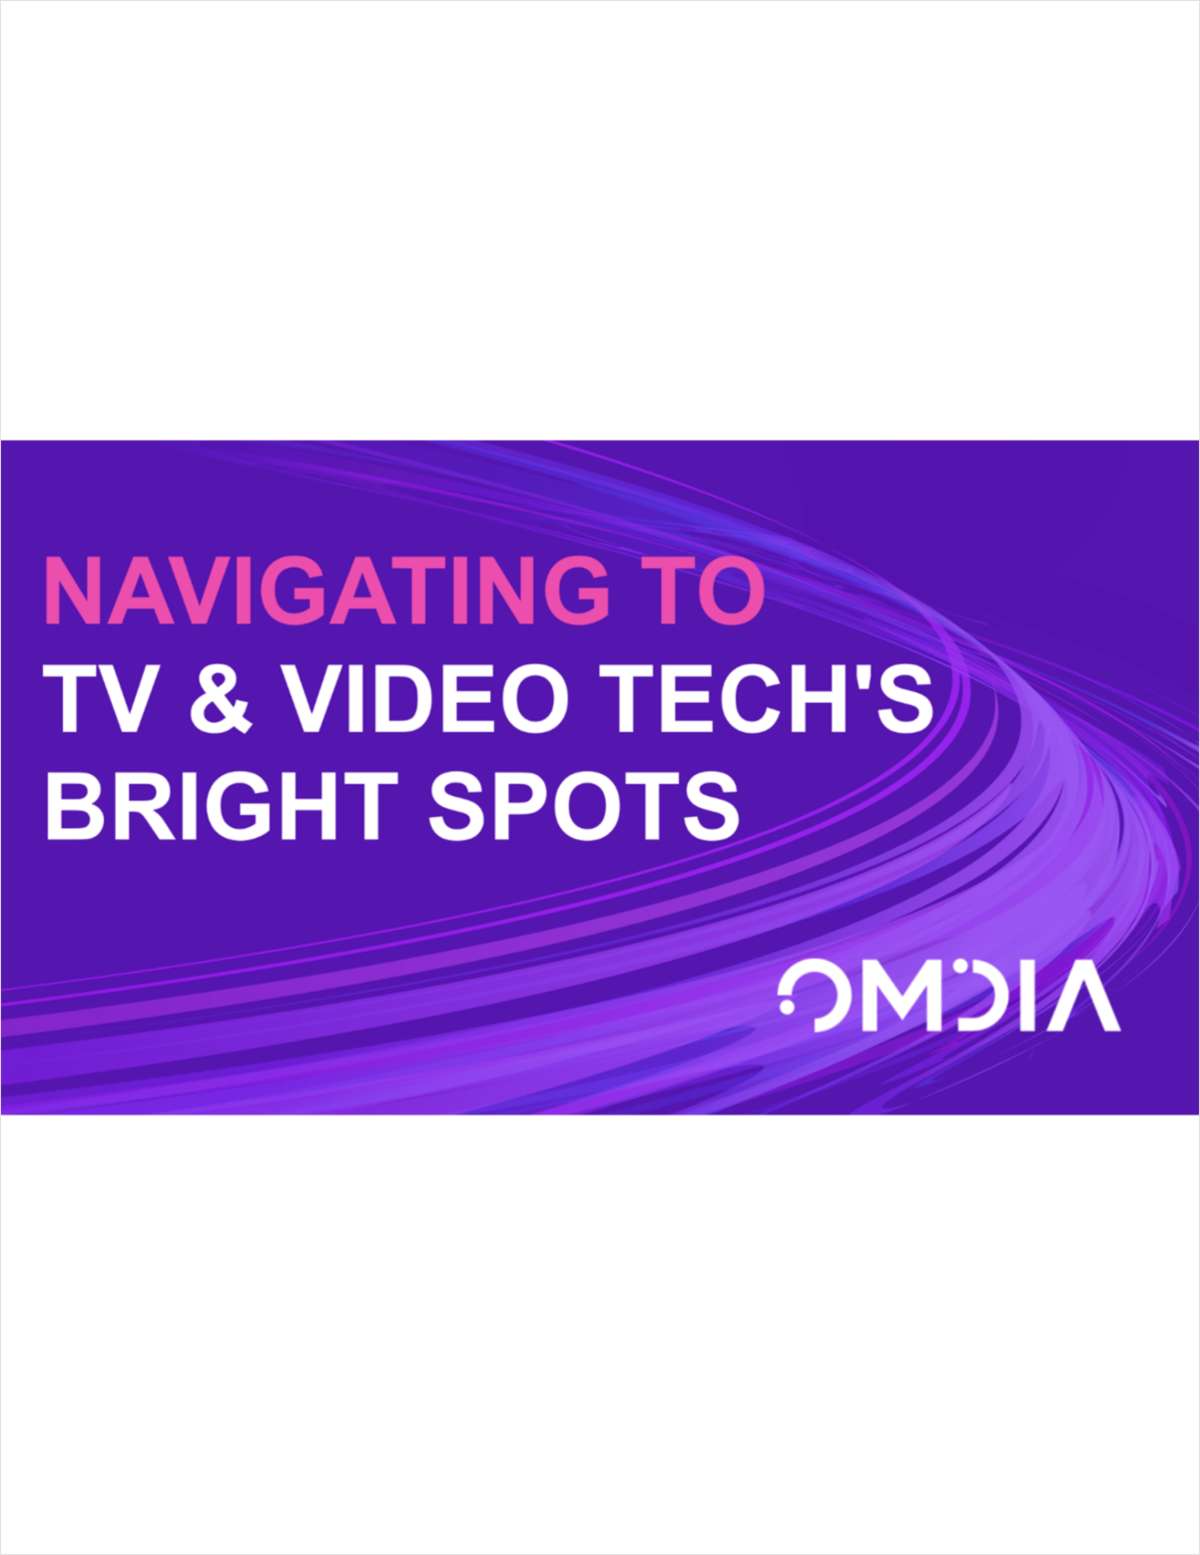 Navigating to TV and Video Tech's Bright Spots